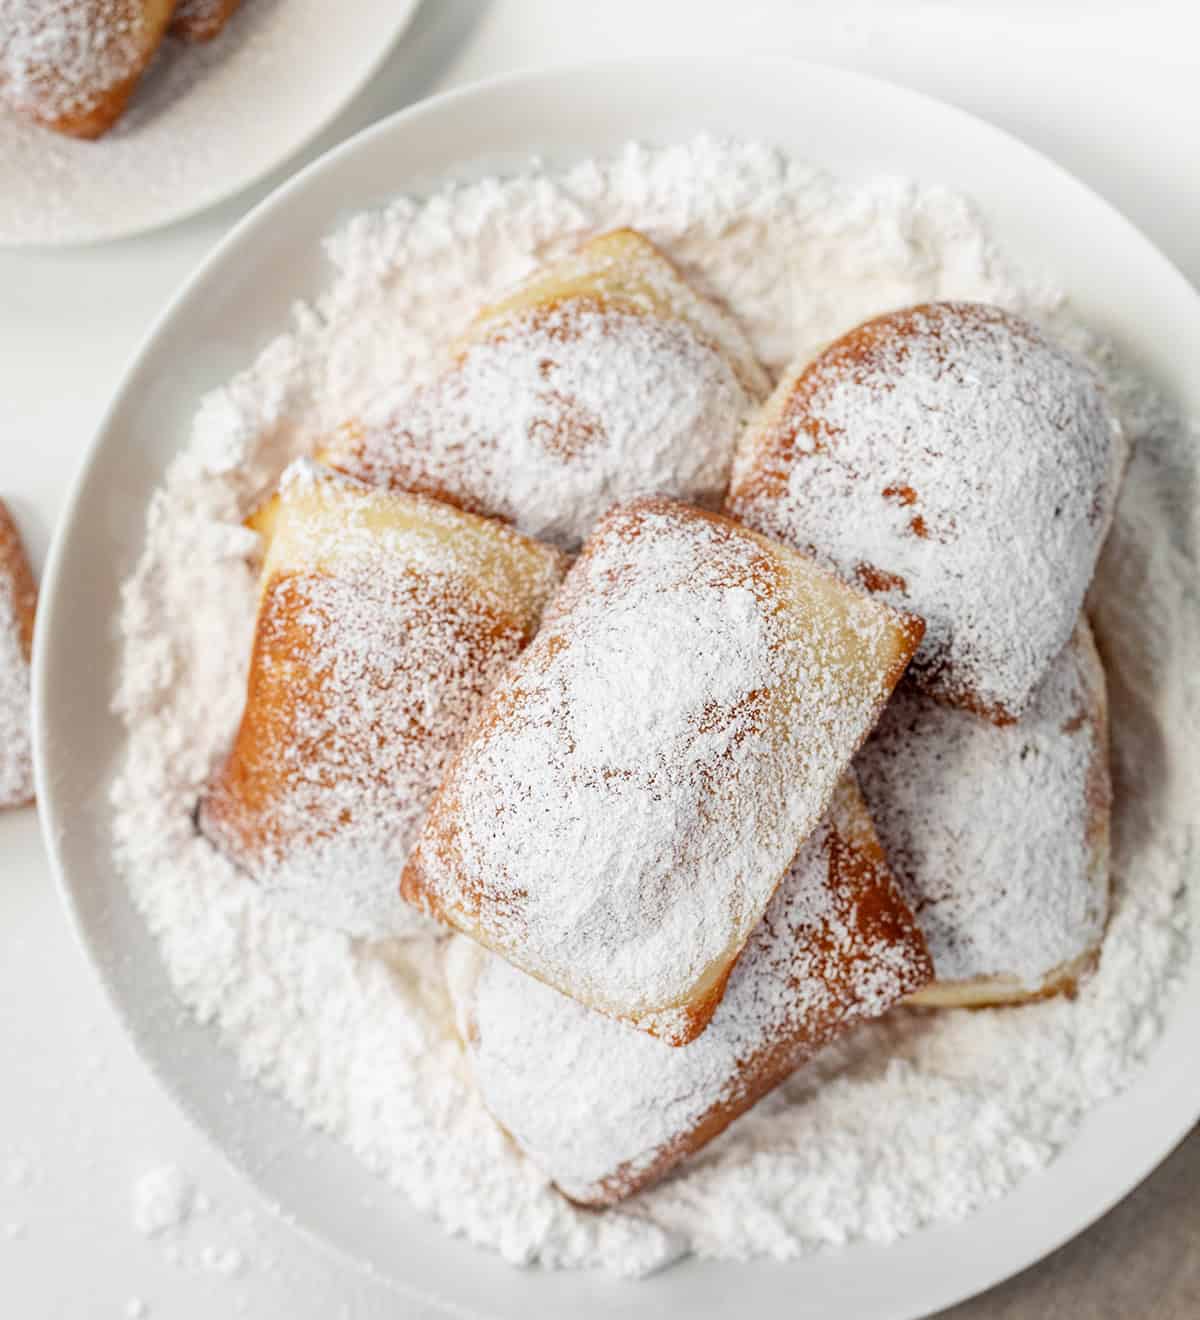 Plate of Beignets surrounded by confectioners sugar on a white counter.